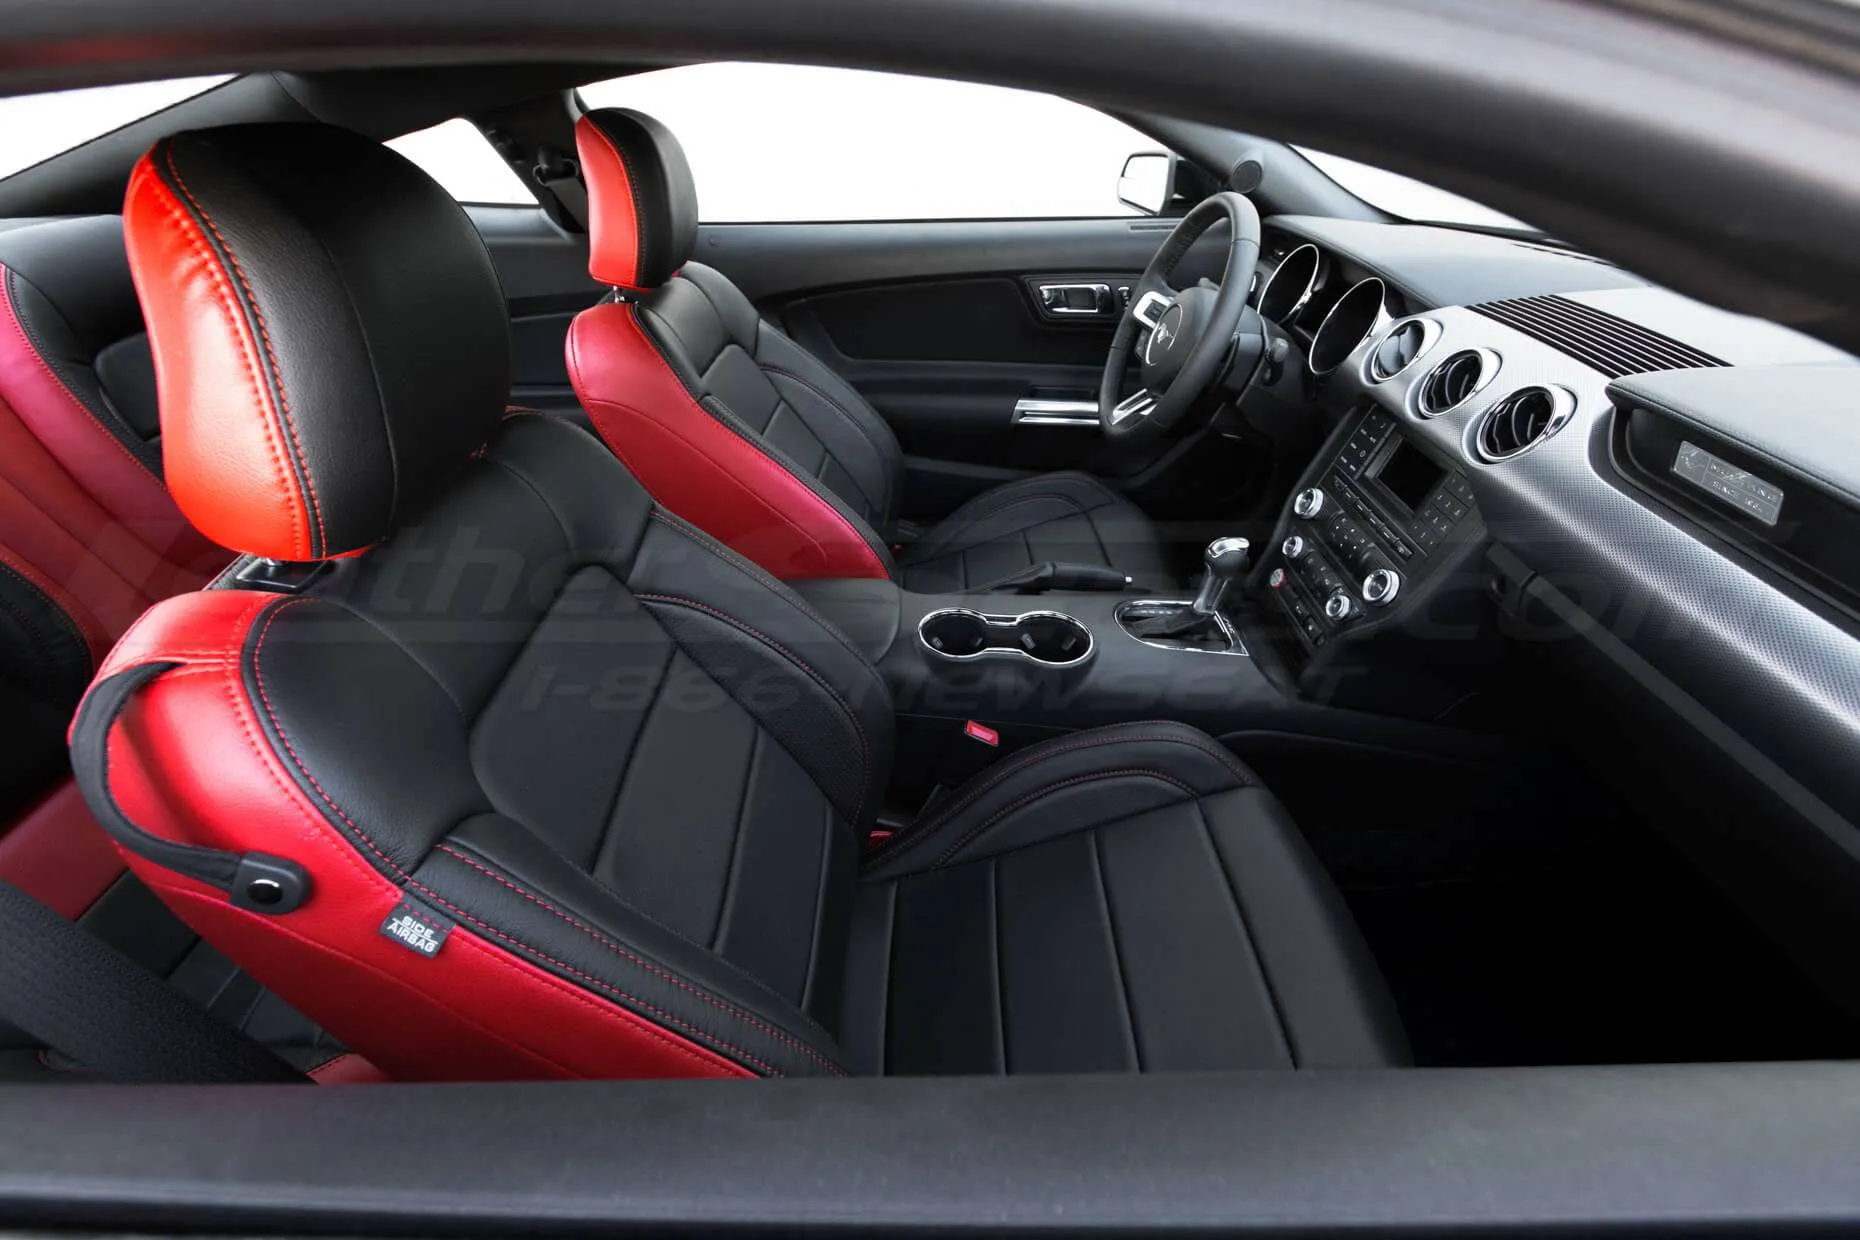 2015-2021 Ford Mustang Leather Upholstery Kit - Black & Bright Red - Installed - Front seats with top-down view